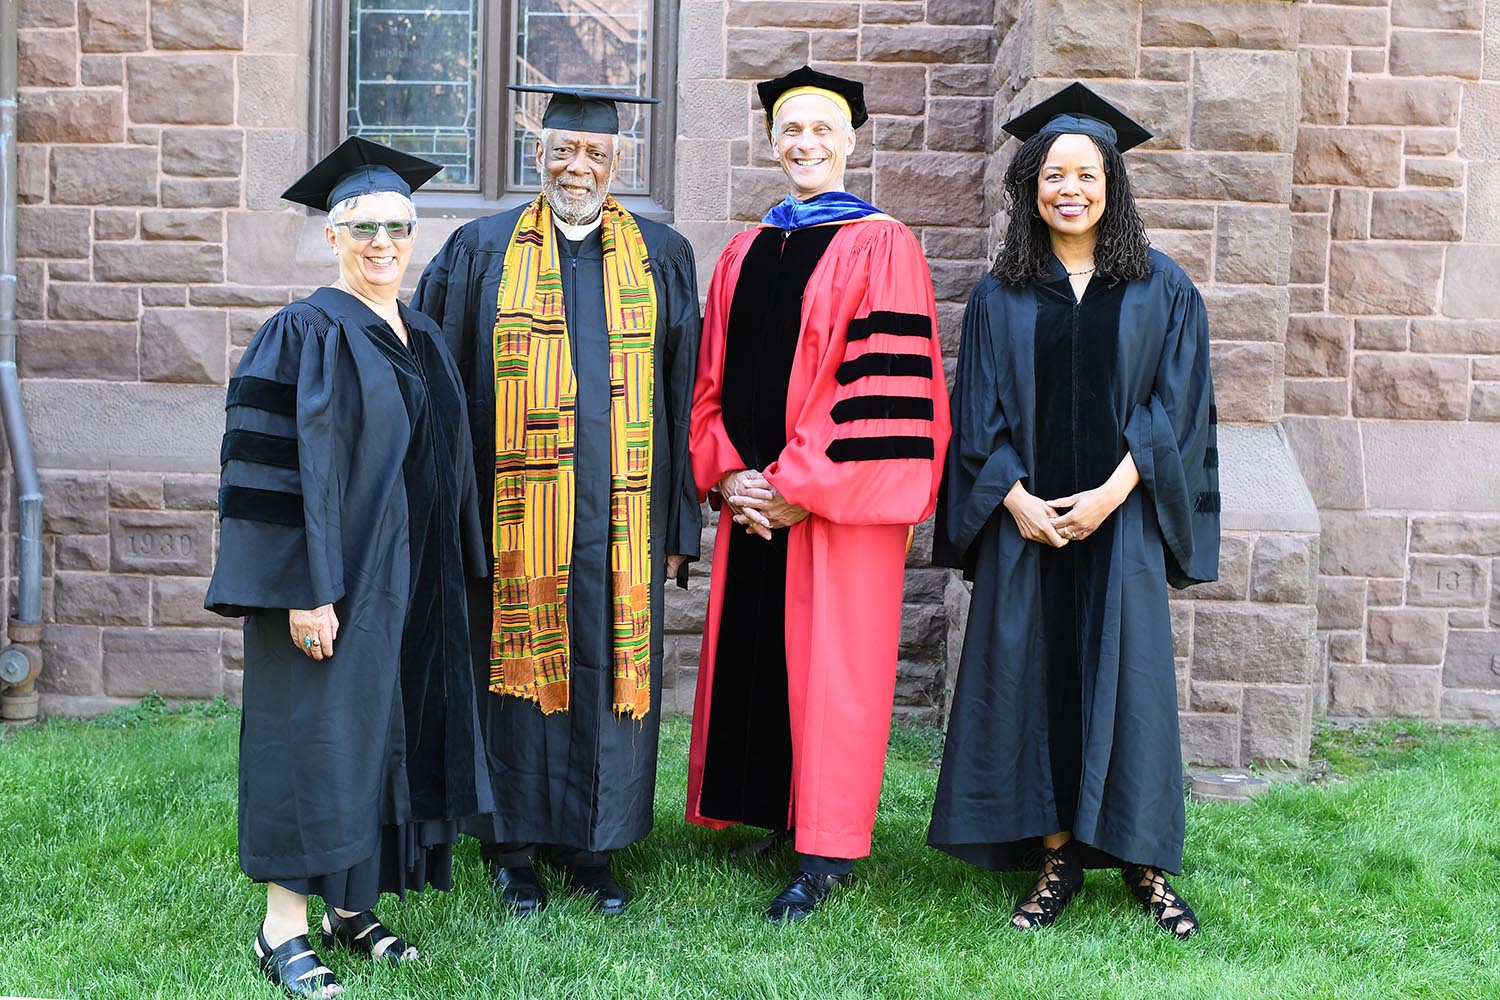 Wesleyan President Michael Roth ’78 and Board of Trustees Chair Donna Morea congratulate honorary degree recipients Saidiya Hartman ’84, Hazel Carby, and Edwin Sanders II ’69 at Wesleyan's 187th Commencement.